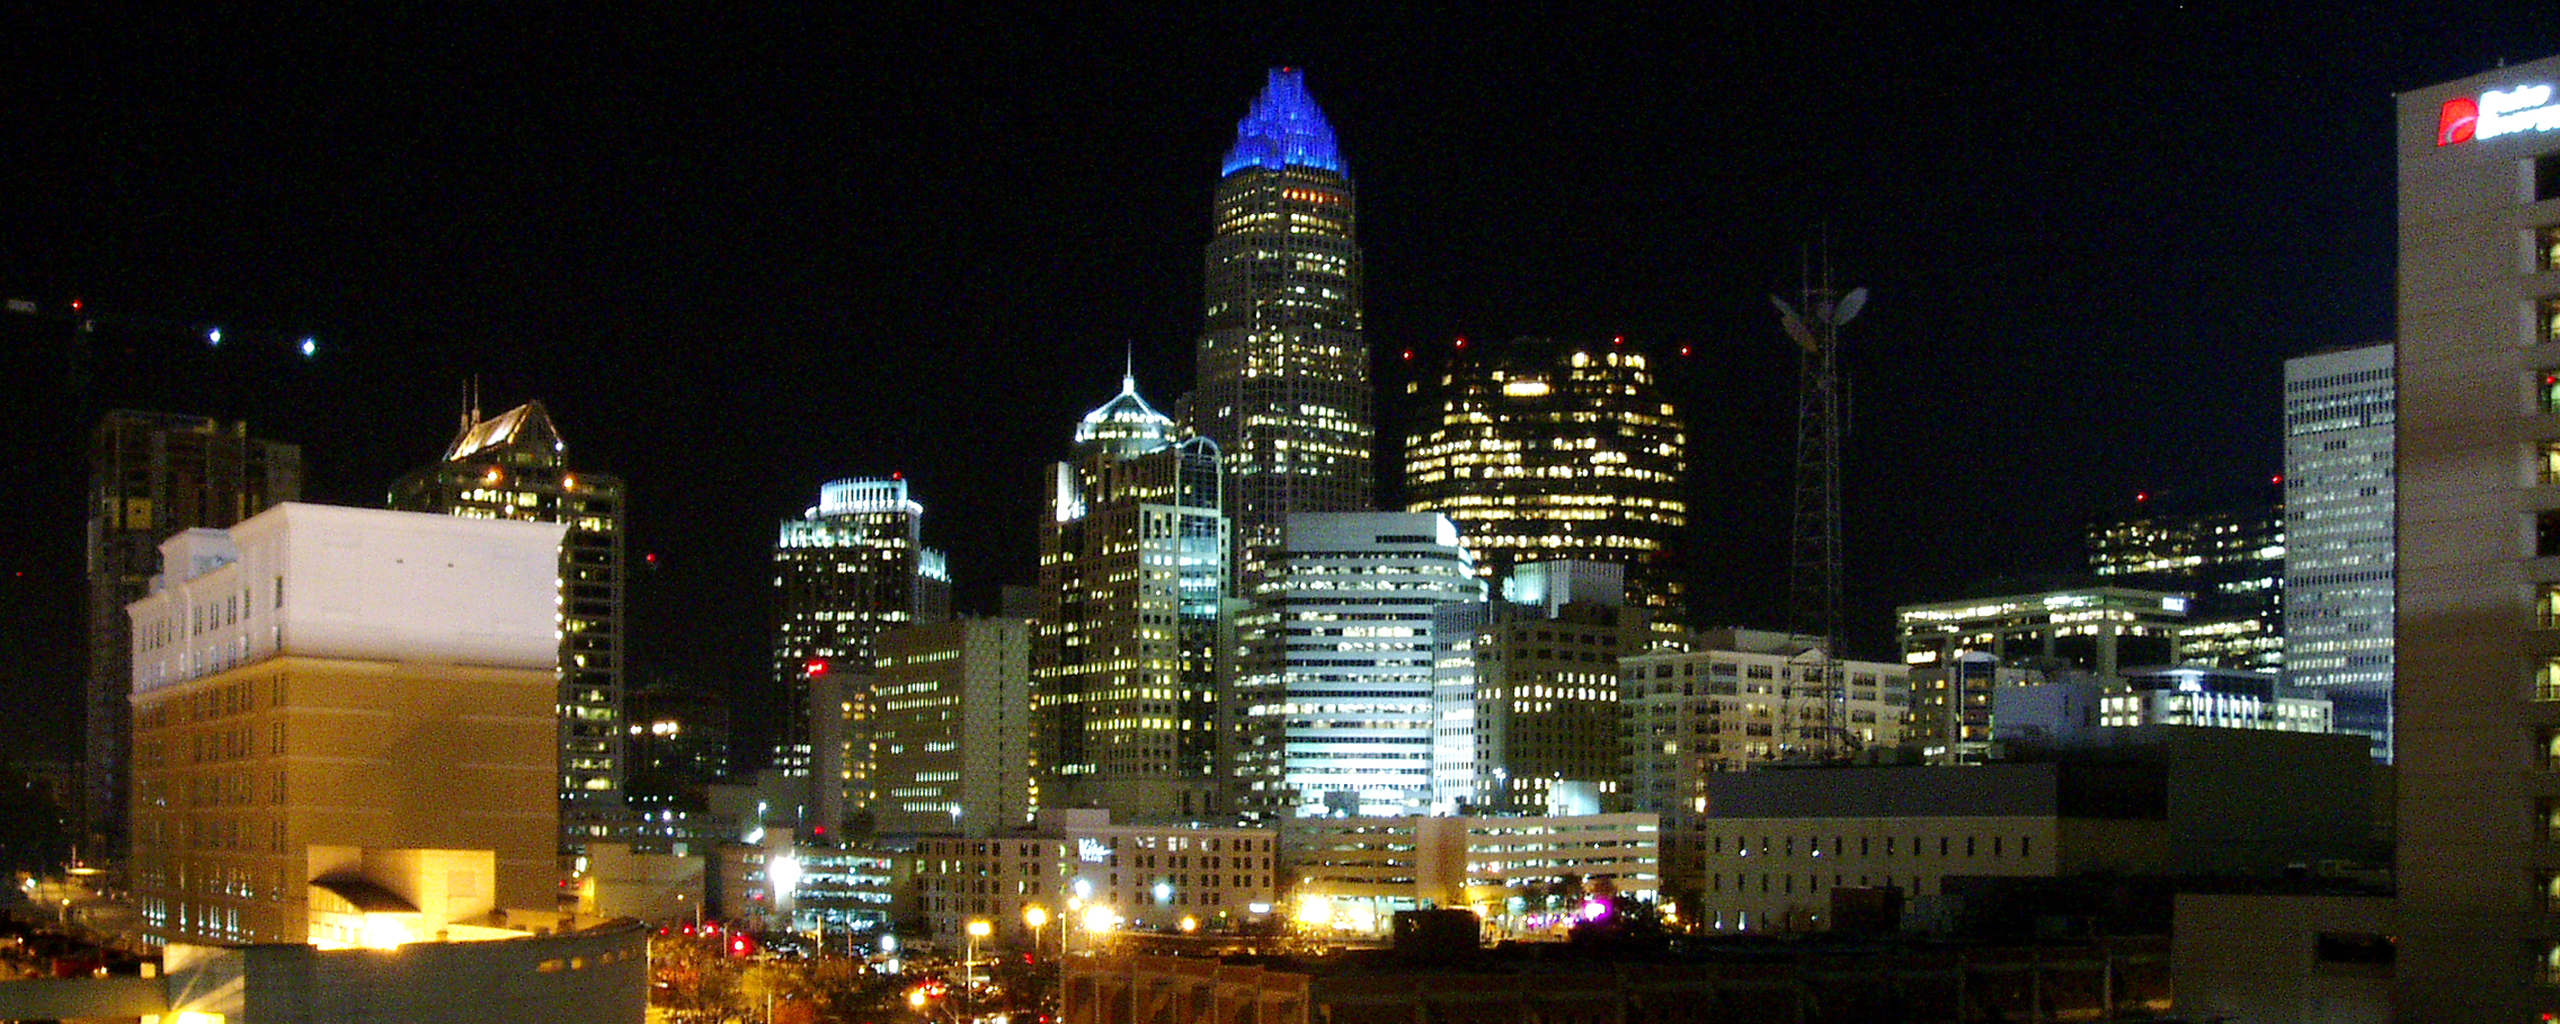 A photo of the Charlotte, NC, skyline taken at night